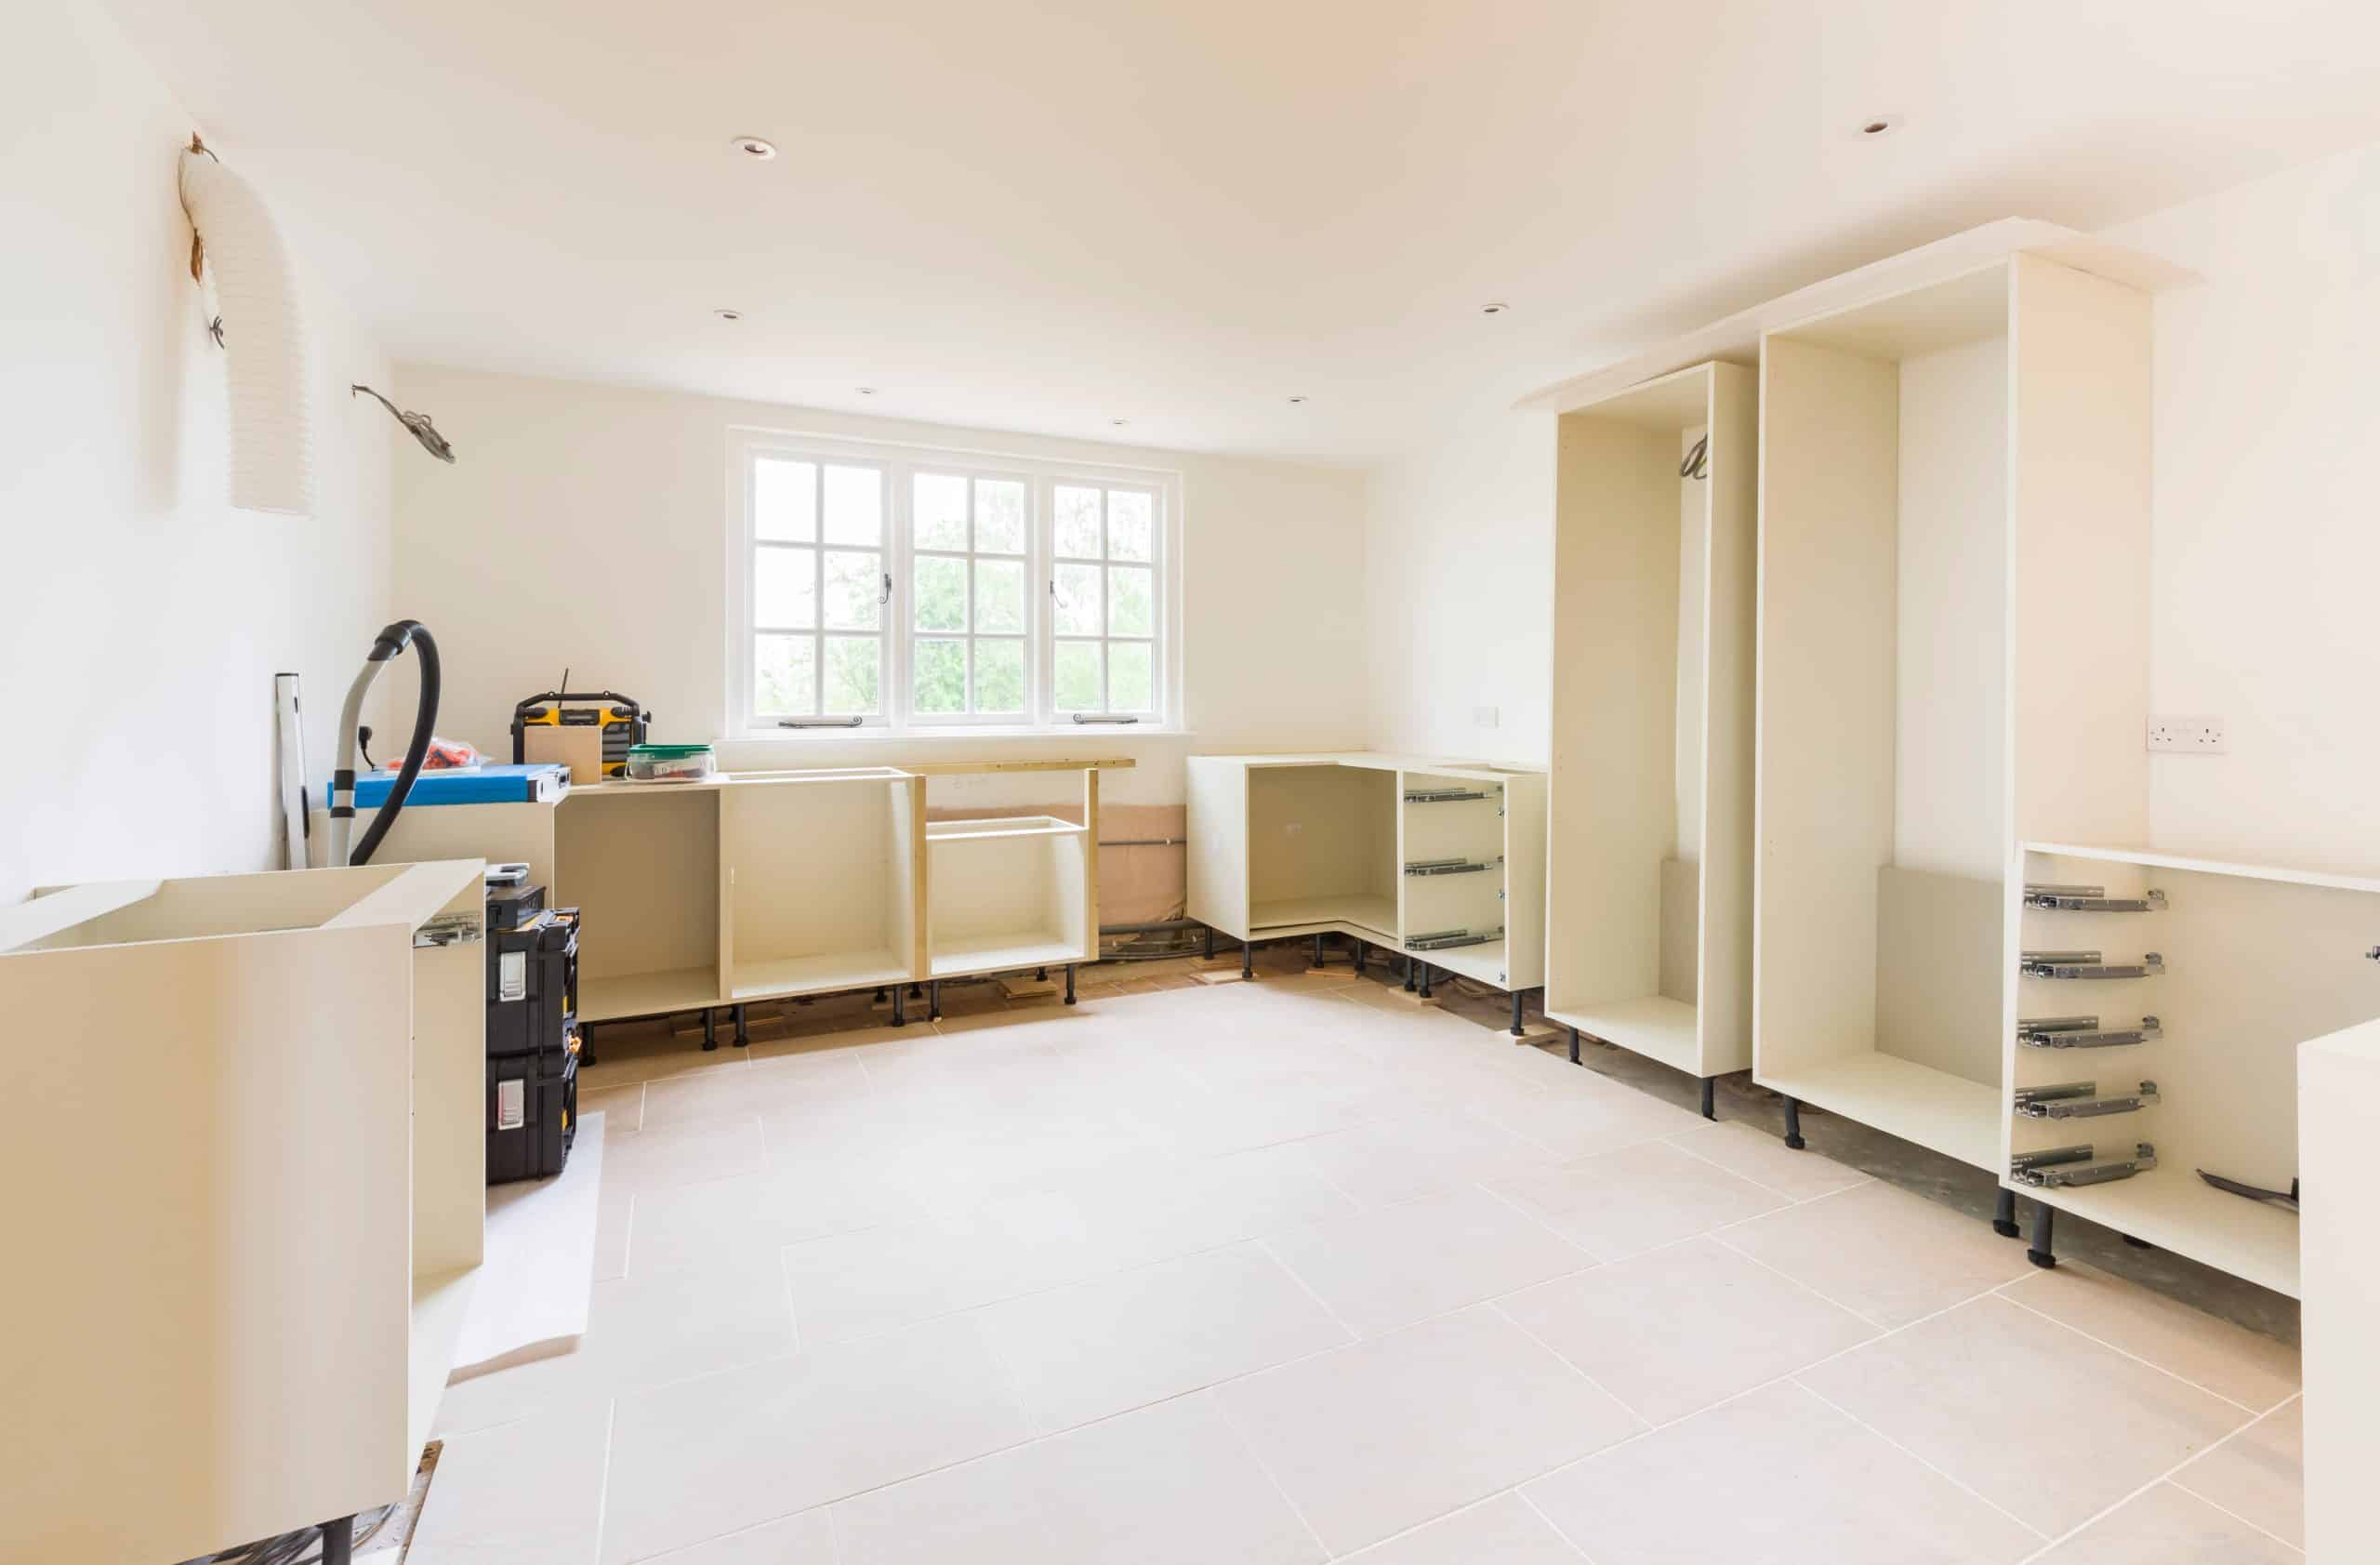 Renovation storage - image shows light and airy kitchen space during renovation with units in place without doors